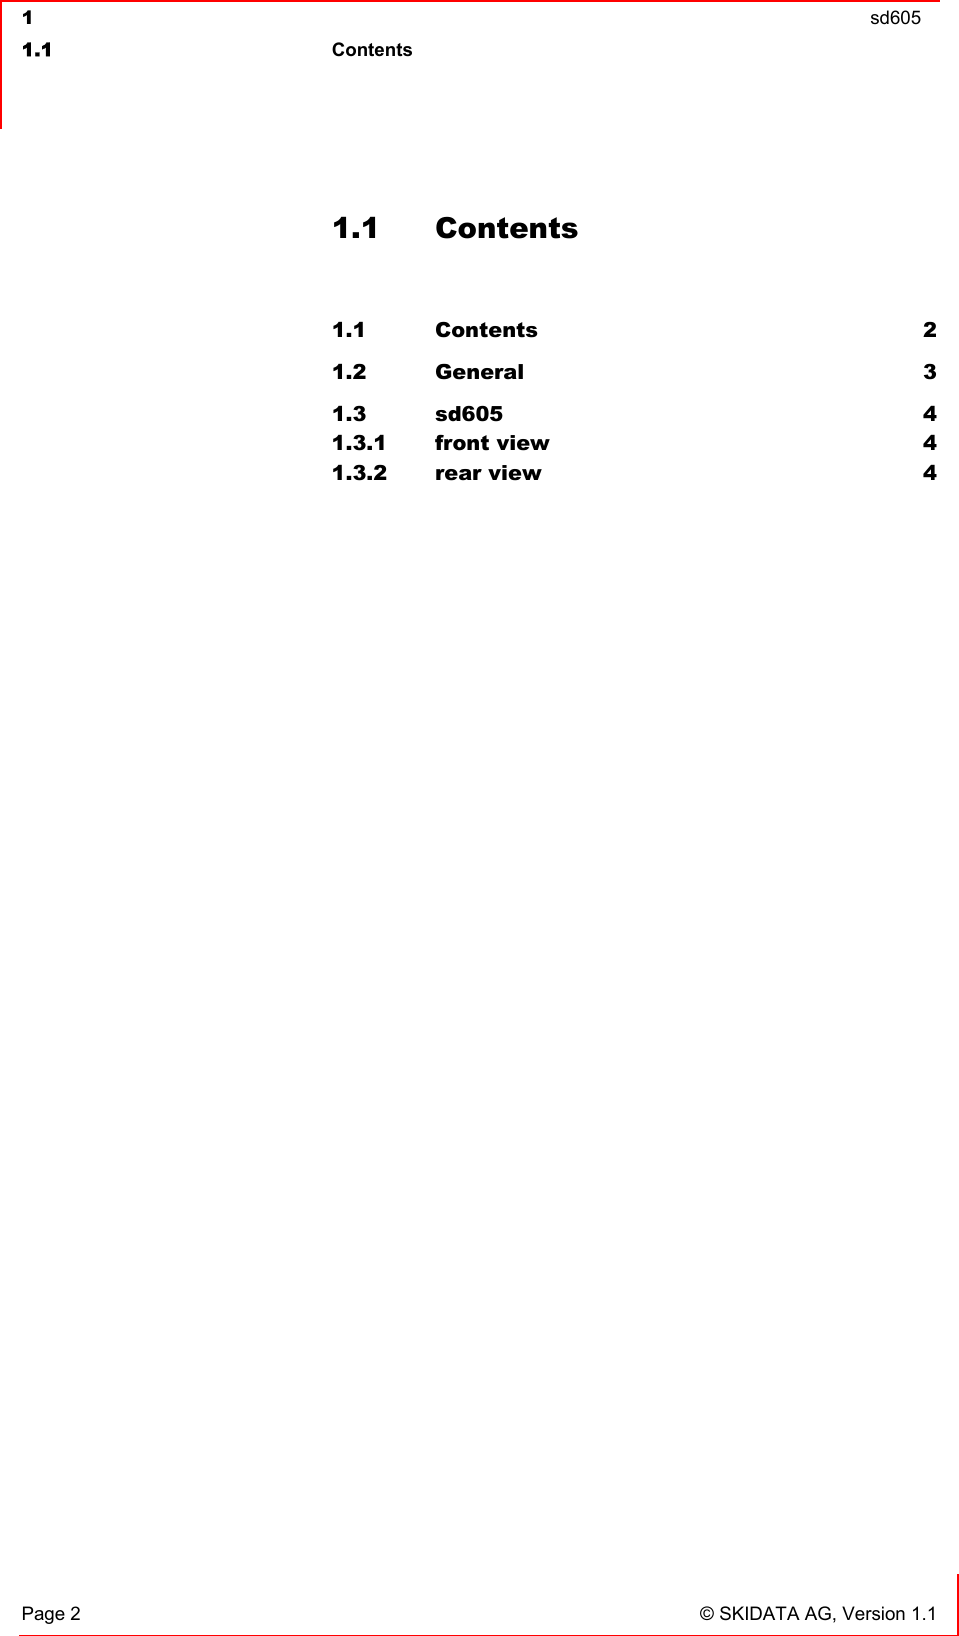  1  sd605  1.1 Contents   Page 2  © SKIDATA AG, Version 1.1 1.1 Contents  1.1 Contents 2 1.2 General 3 1.3 sd605 4 1.3.1 front view  4 1.3.2 rear view  4  